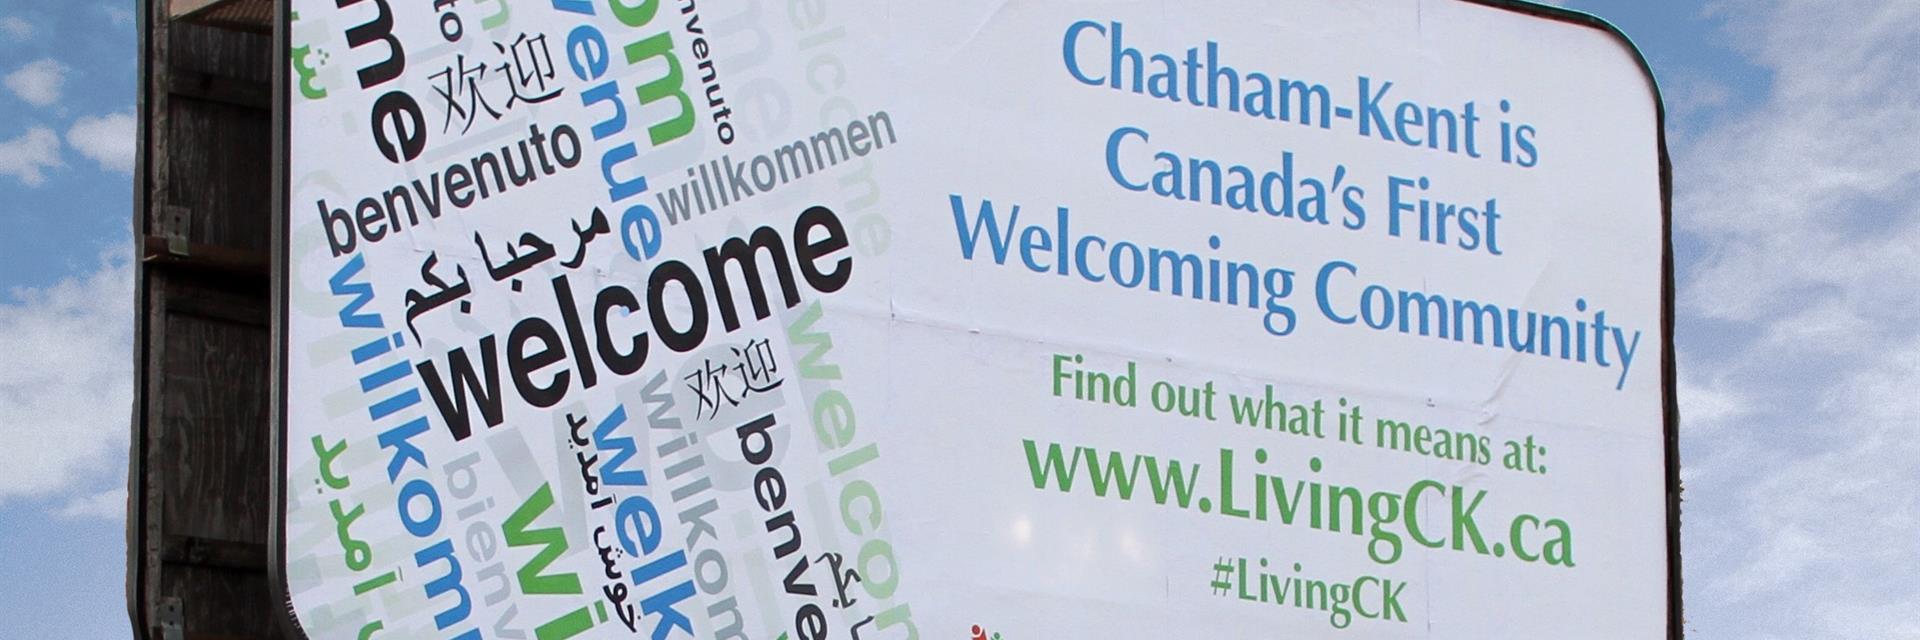 A billboards showing Chatham-Kent is Canada's fist Welcoming Community